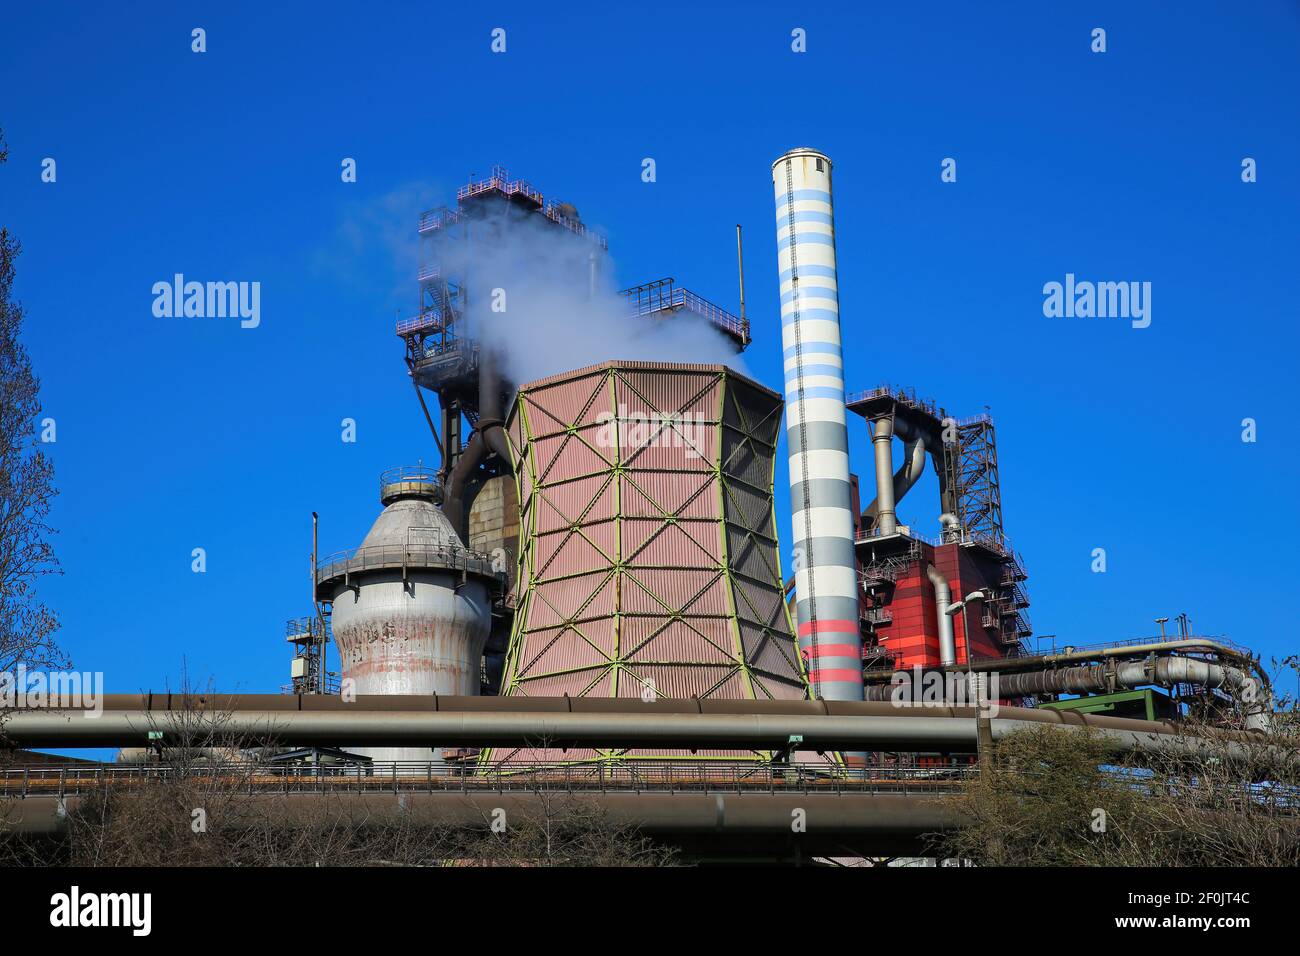 Duisburg (ruhrgebiet), Germany - March 1. 2021: View on industrial complex with smoking chimneys and tower against blue sky - Thyssen Krupp steel comp Stock Photo